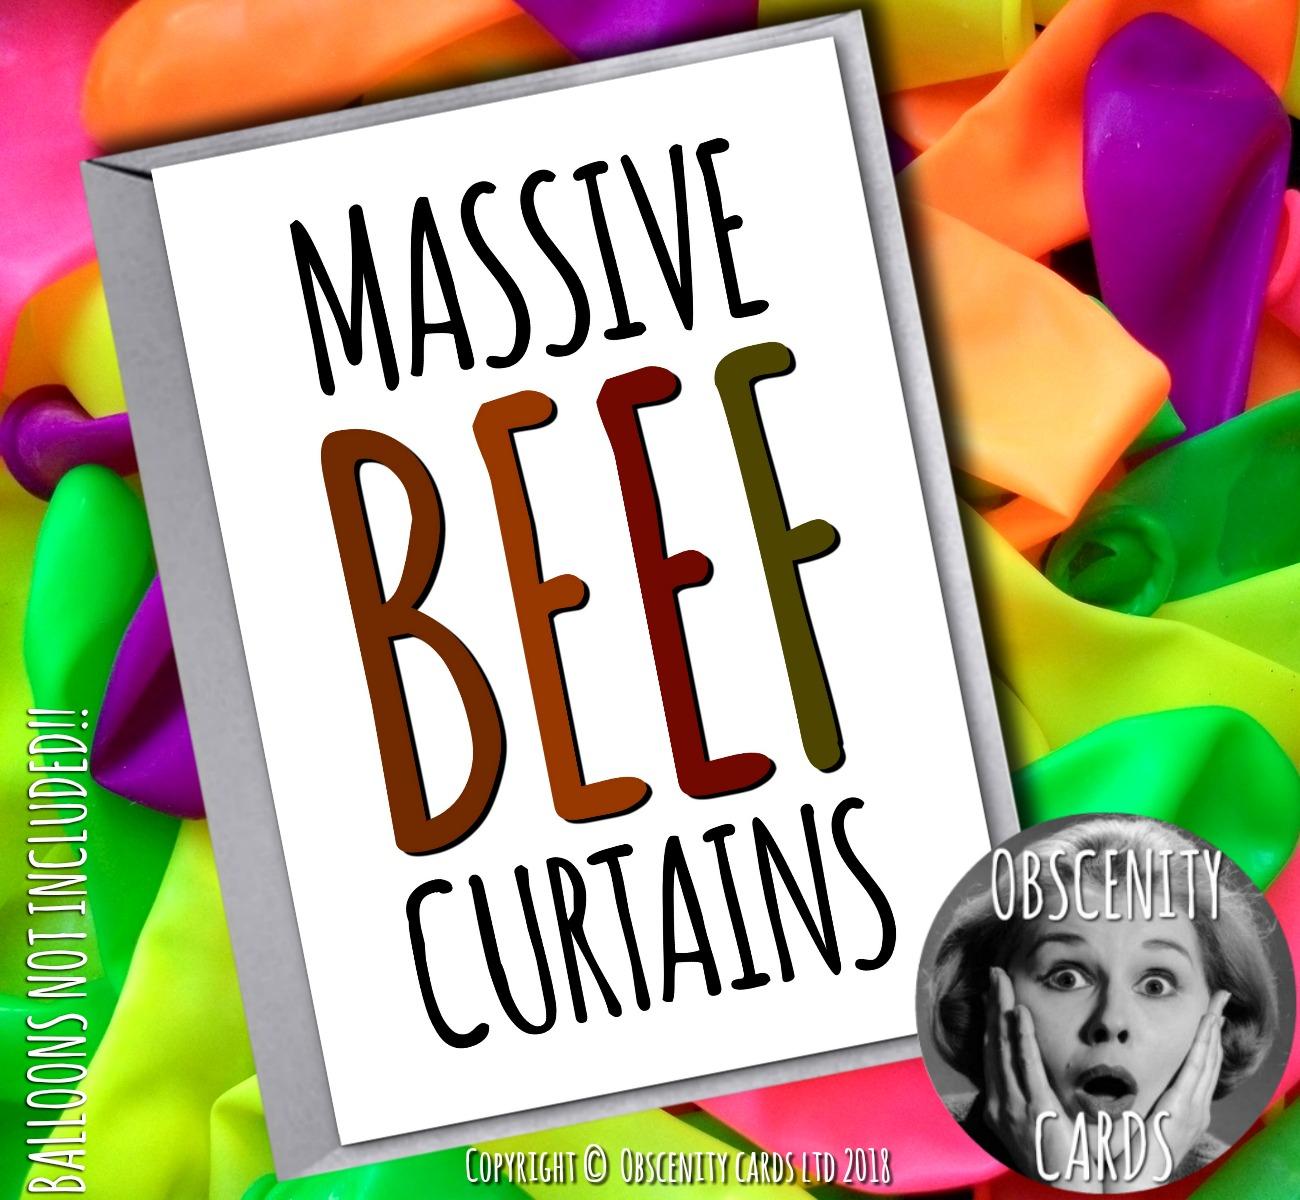 Massive Beef Curtains Card By Obscenity Cards